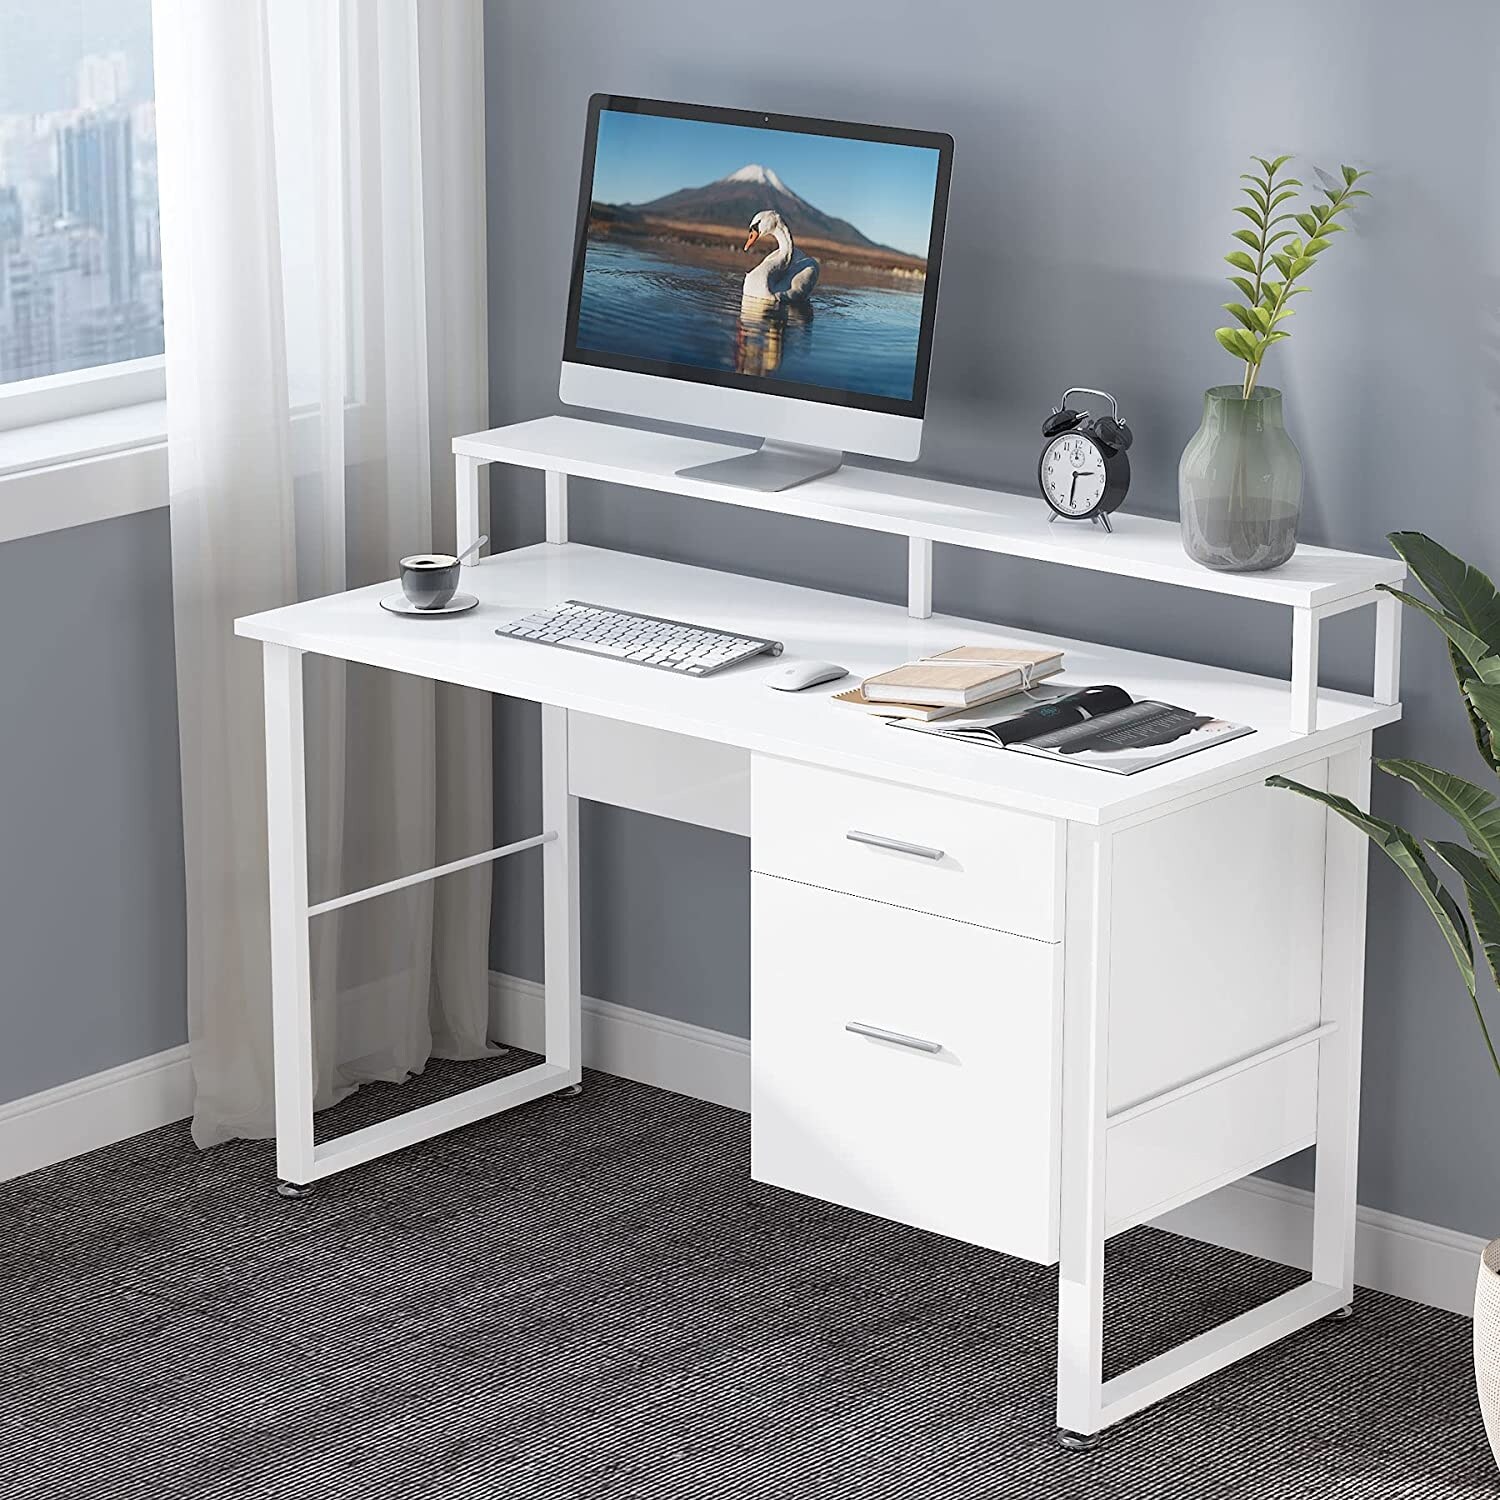 https://ak1.ostkcdn.com/images/products/is/images/direct/c05058f035d2d5b2a43b152b06f4c322a9884e29/47-Inches-White-Computer-Desk-with-Hutch%2C-Writing-Desk-with-2-Drawers.jpg